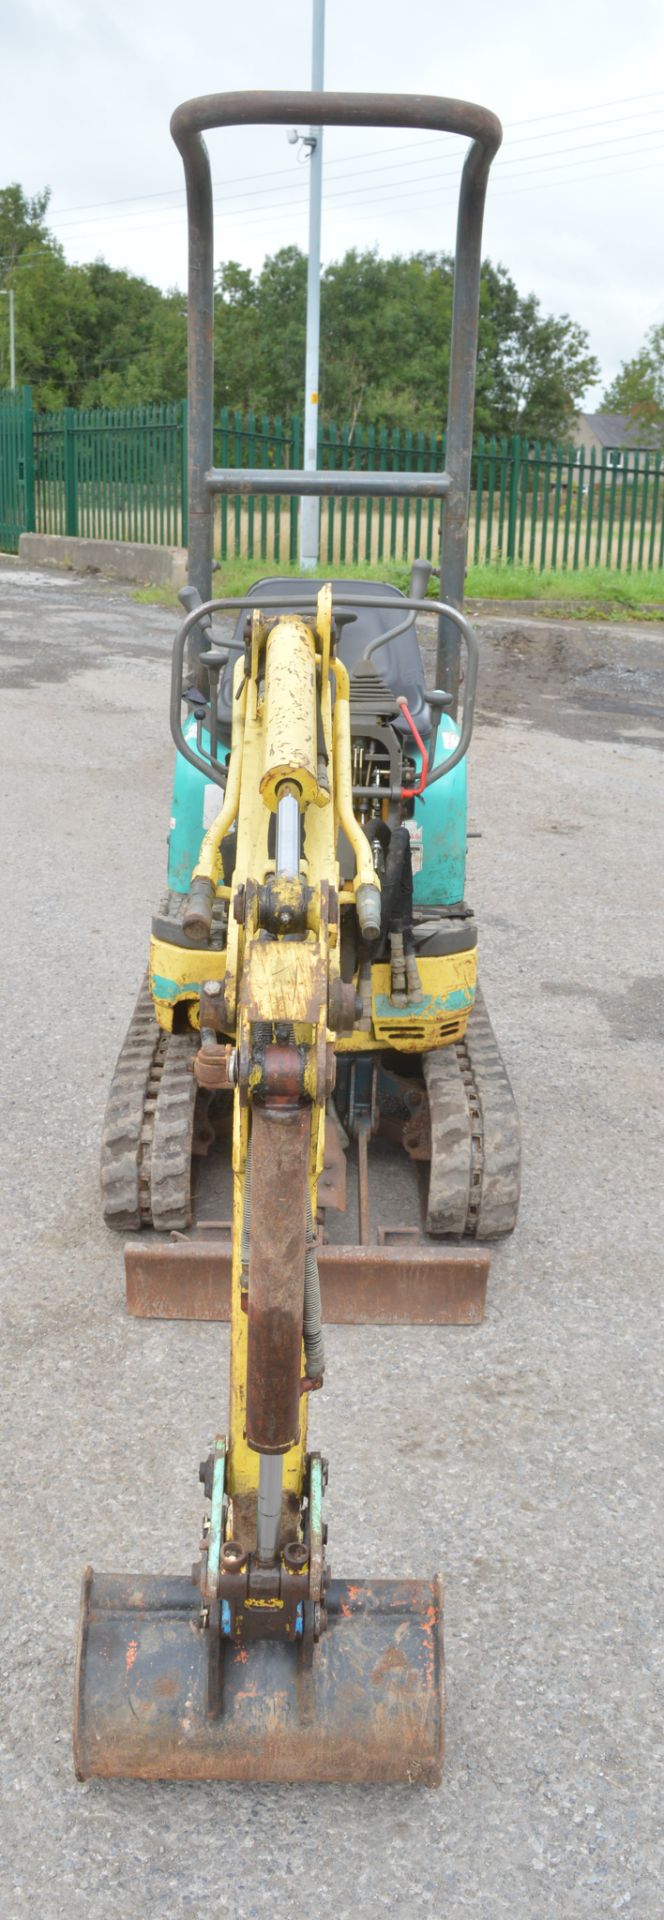 Ammann Yanmar B08-3 1 tonne rubber tracked mini excavator Year: 2002 S/N: 00862B Recorded hours: - Image 6 of 12